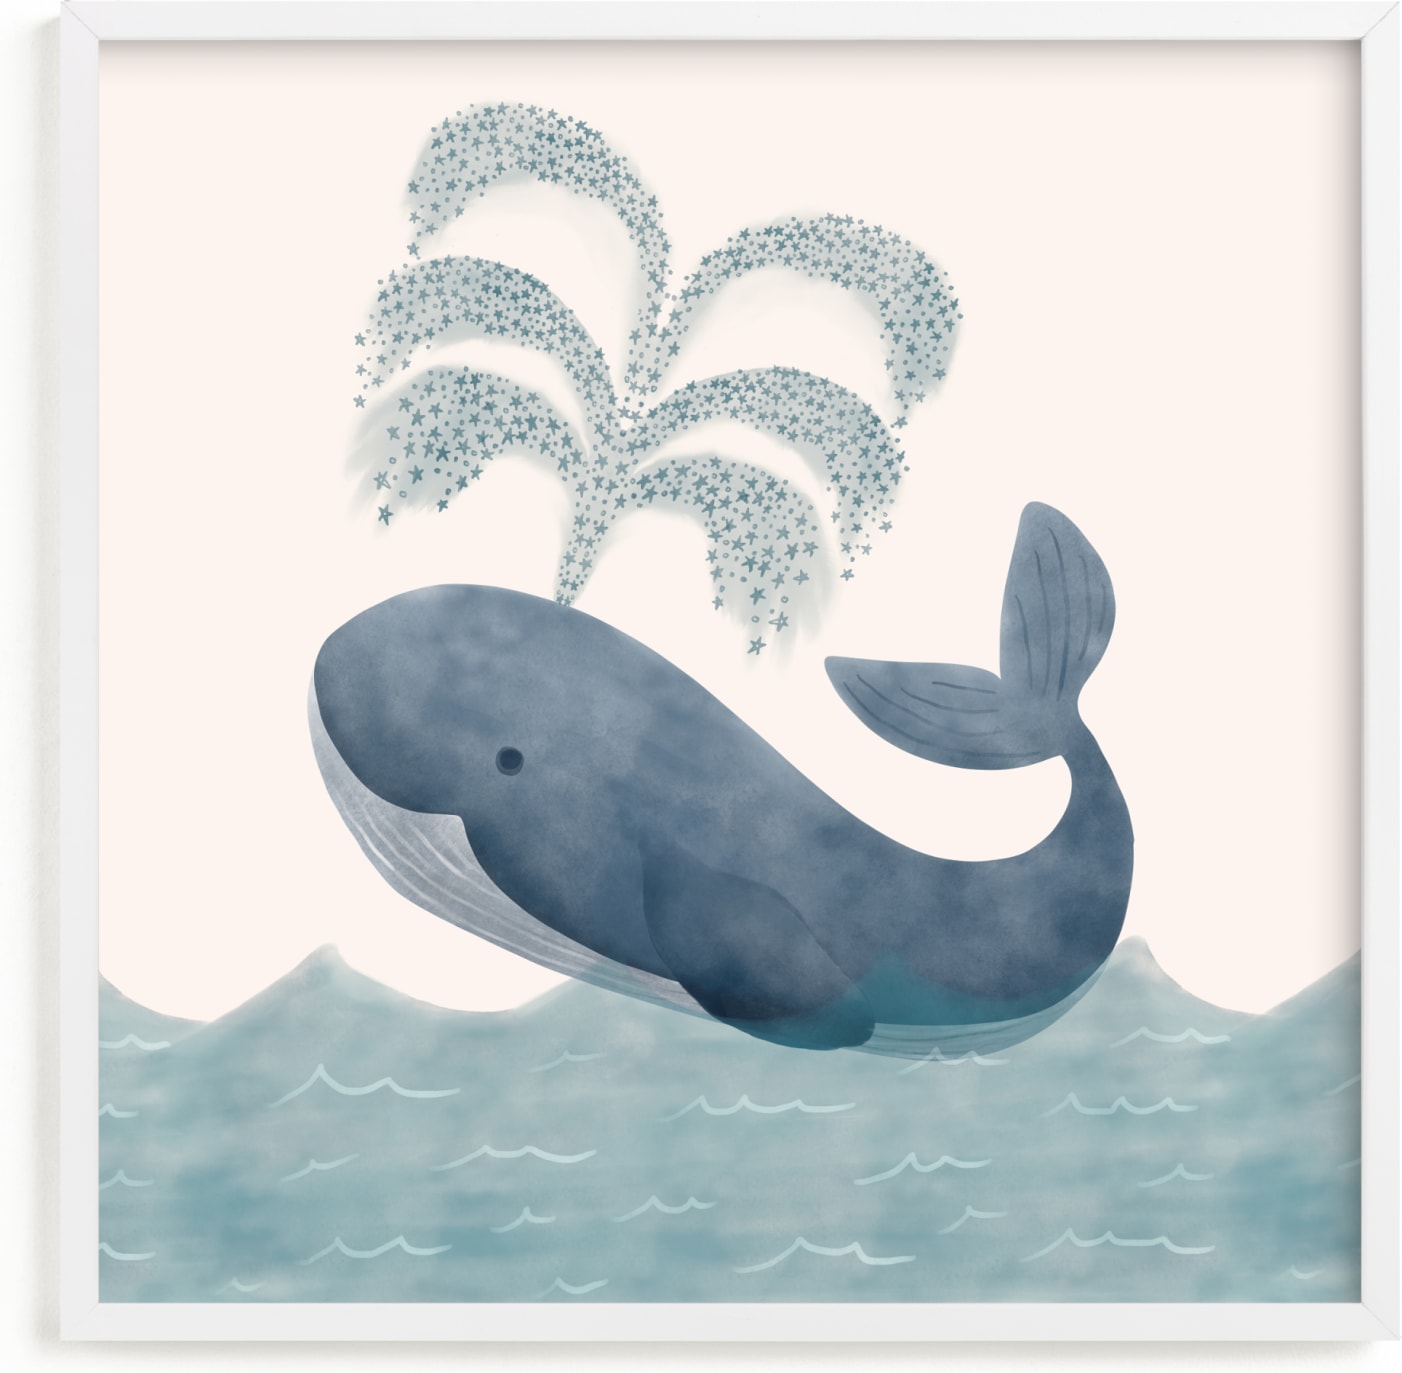 This is a blue art by Elly called Whale.